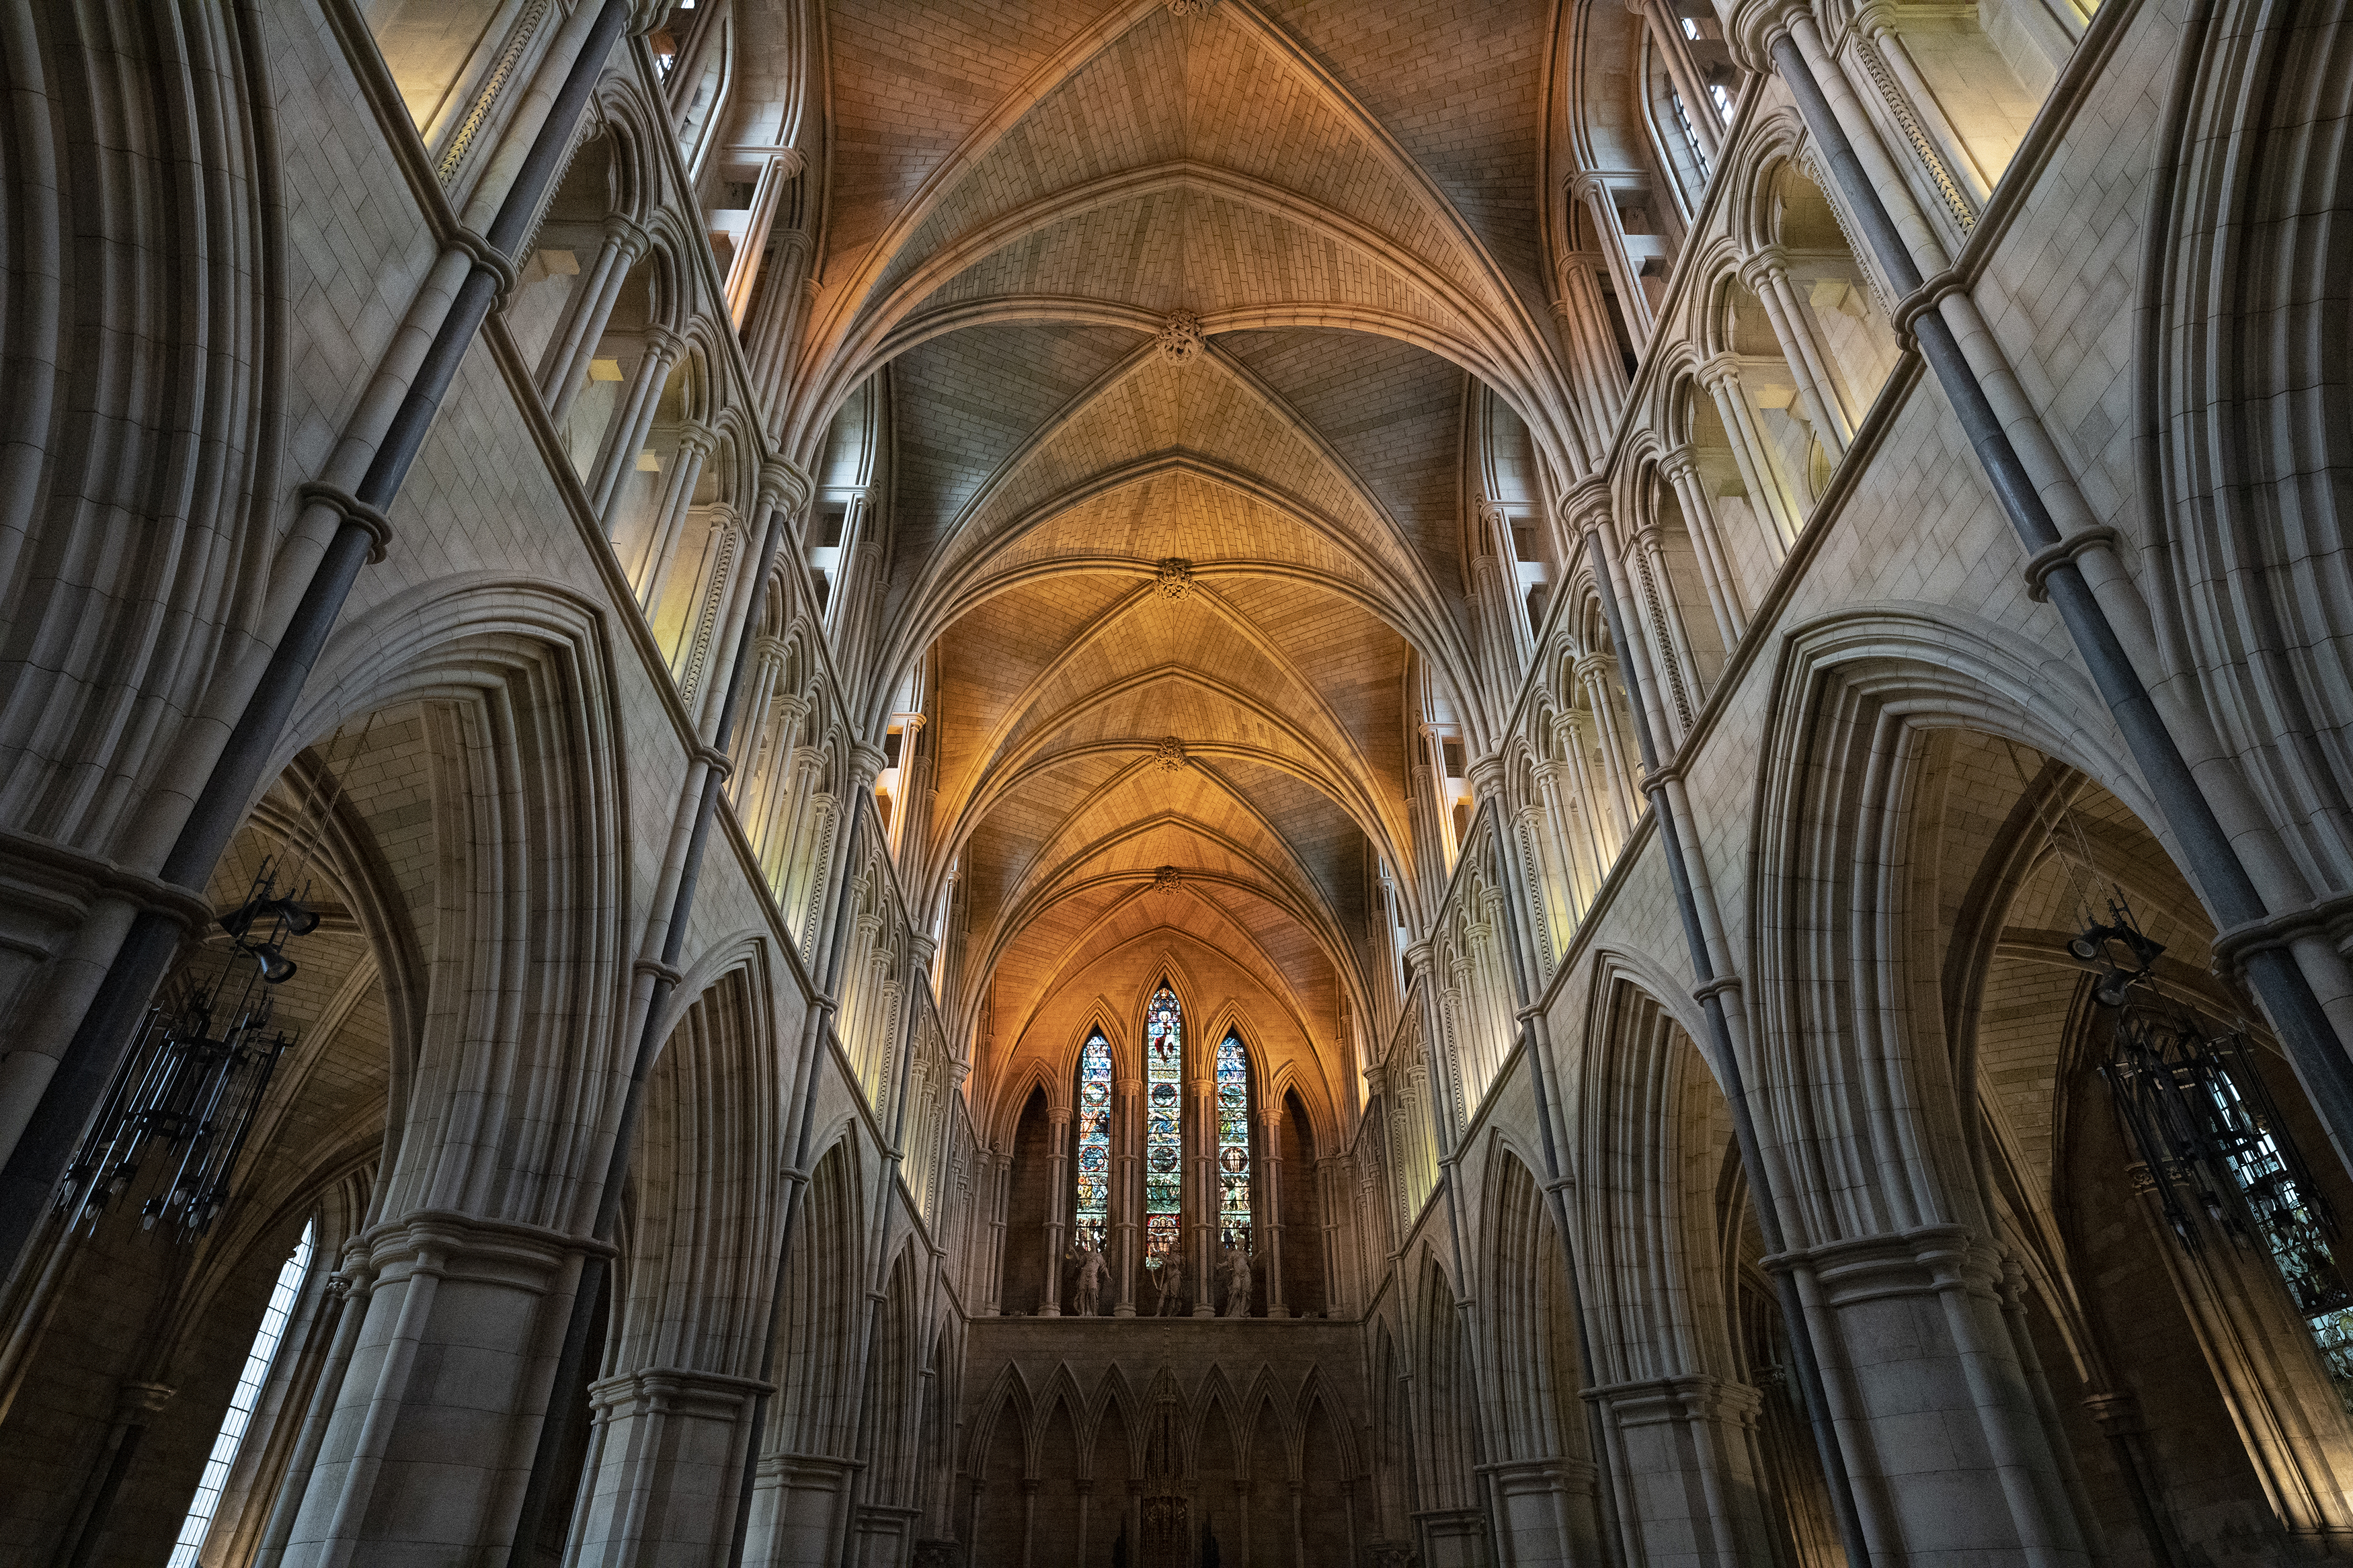 The inside of Southwark Cathedral